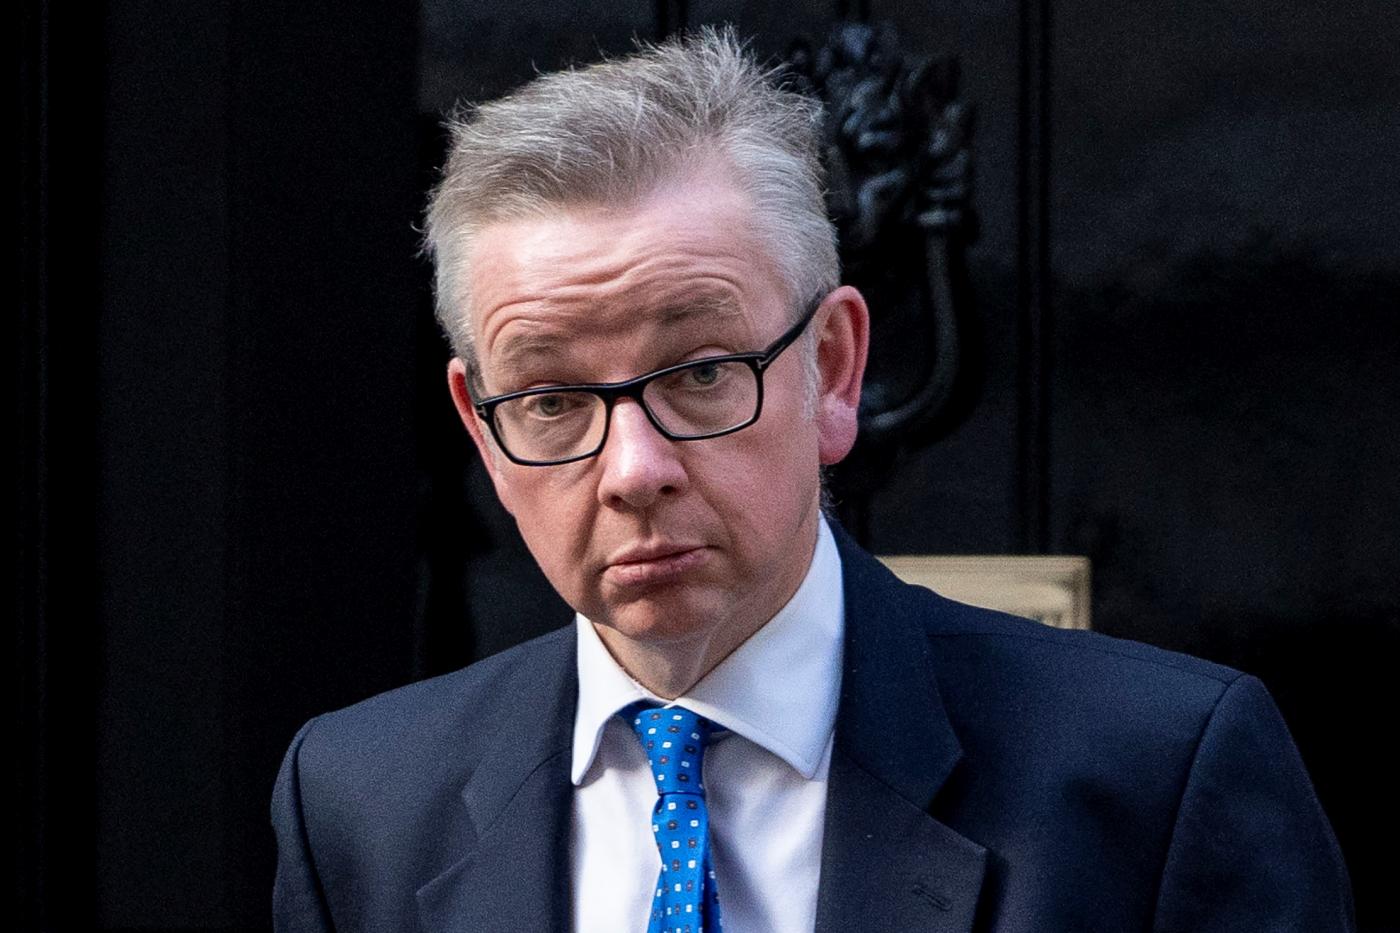 A Michael Gove premiership would be another blow for British Muslims